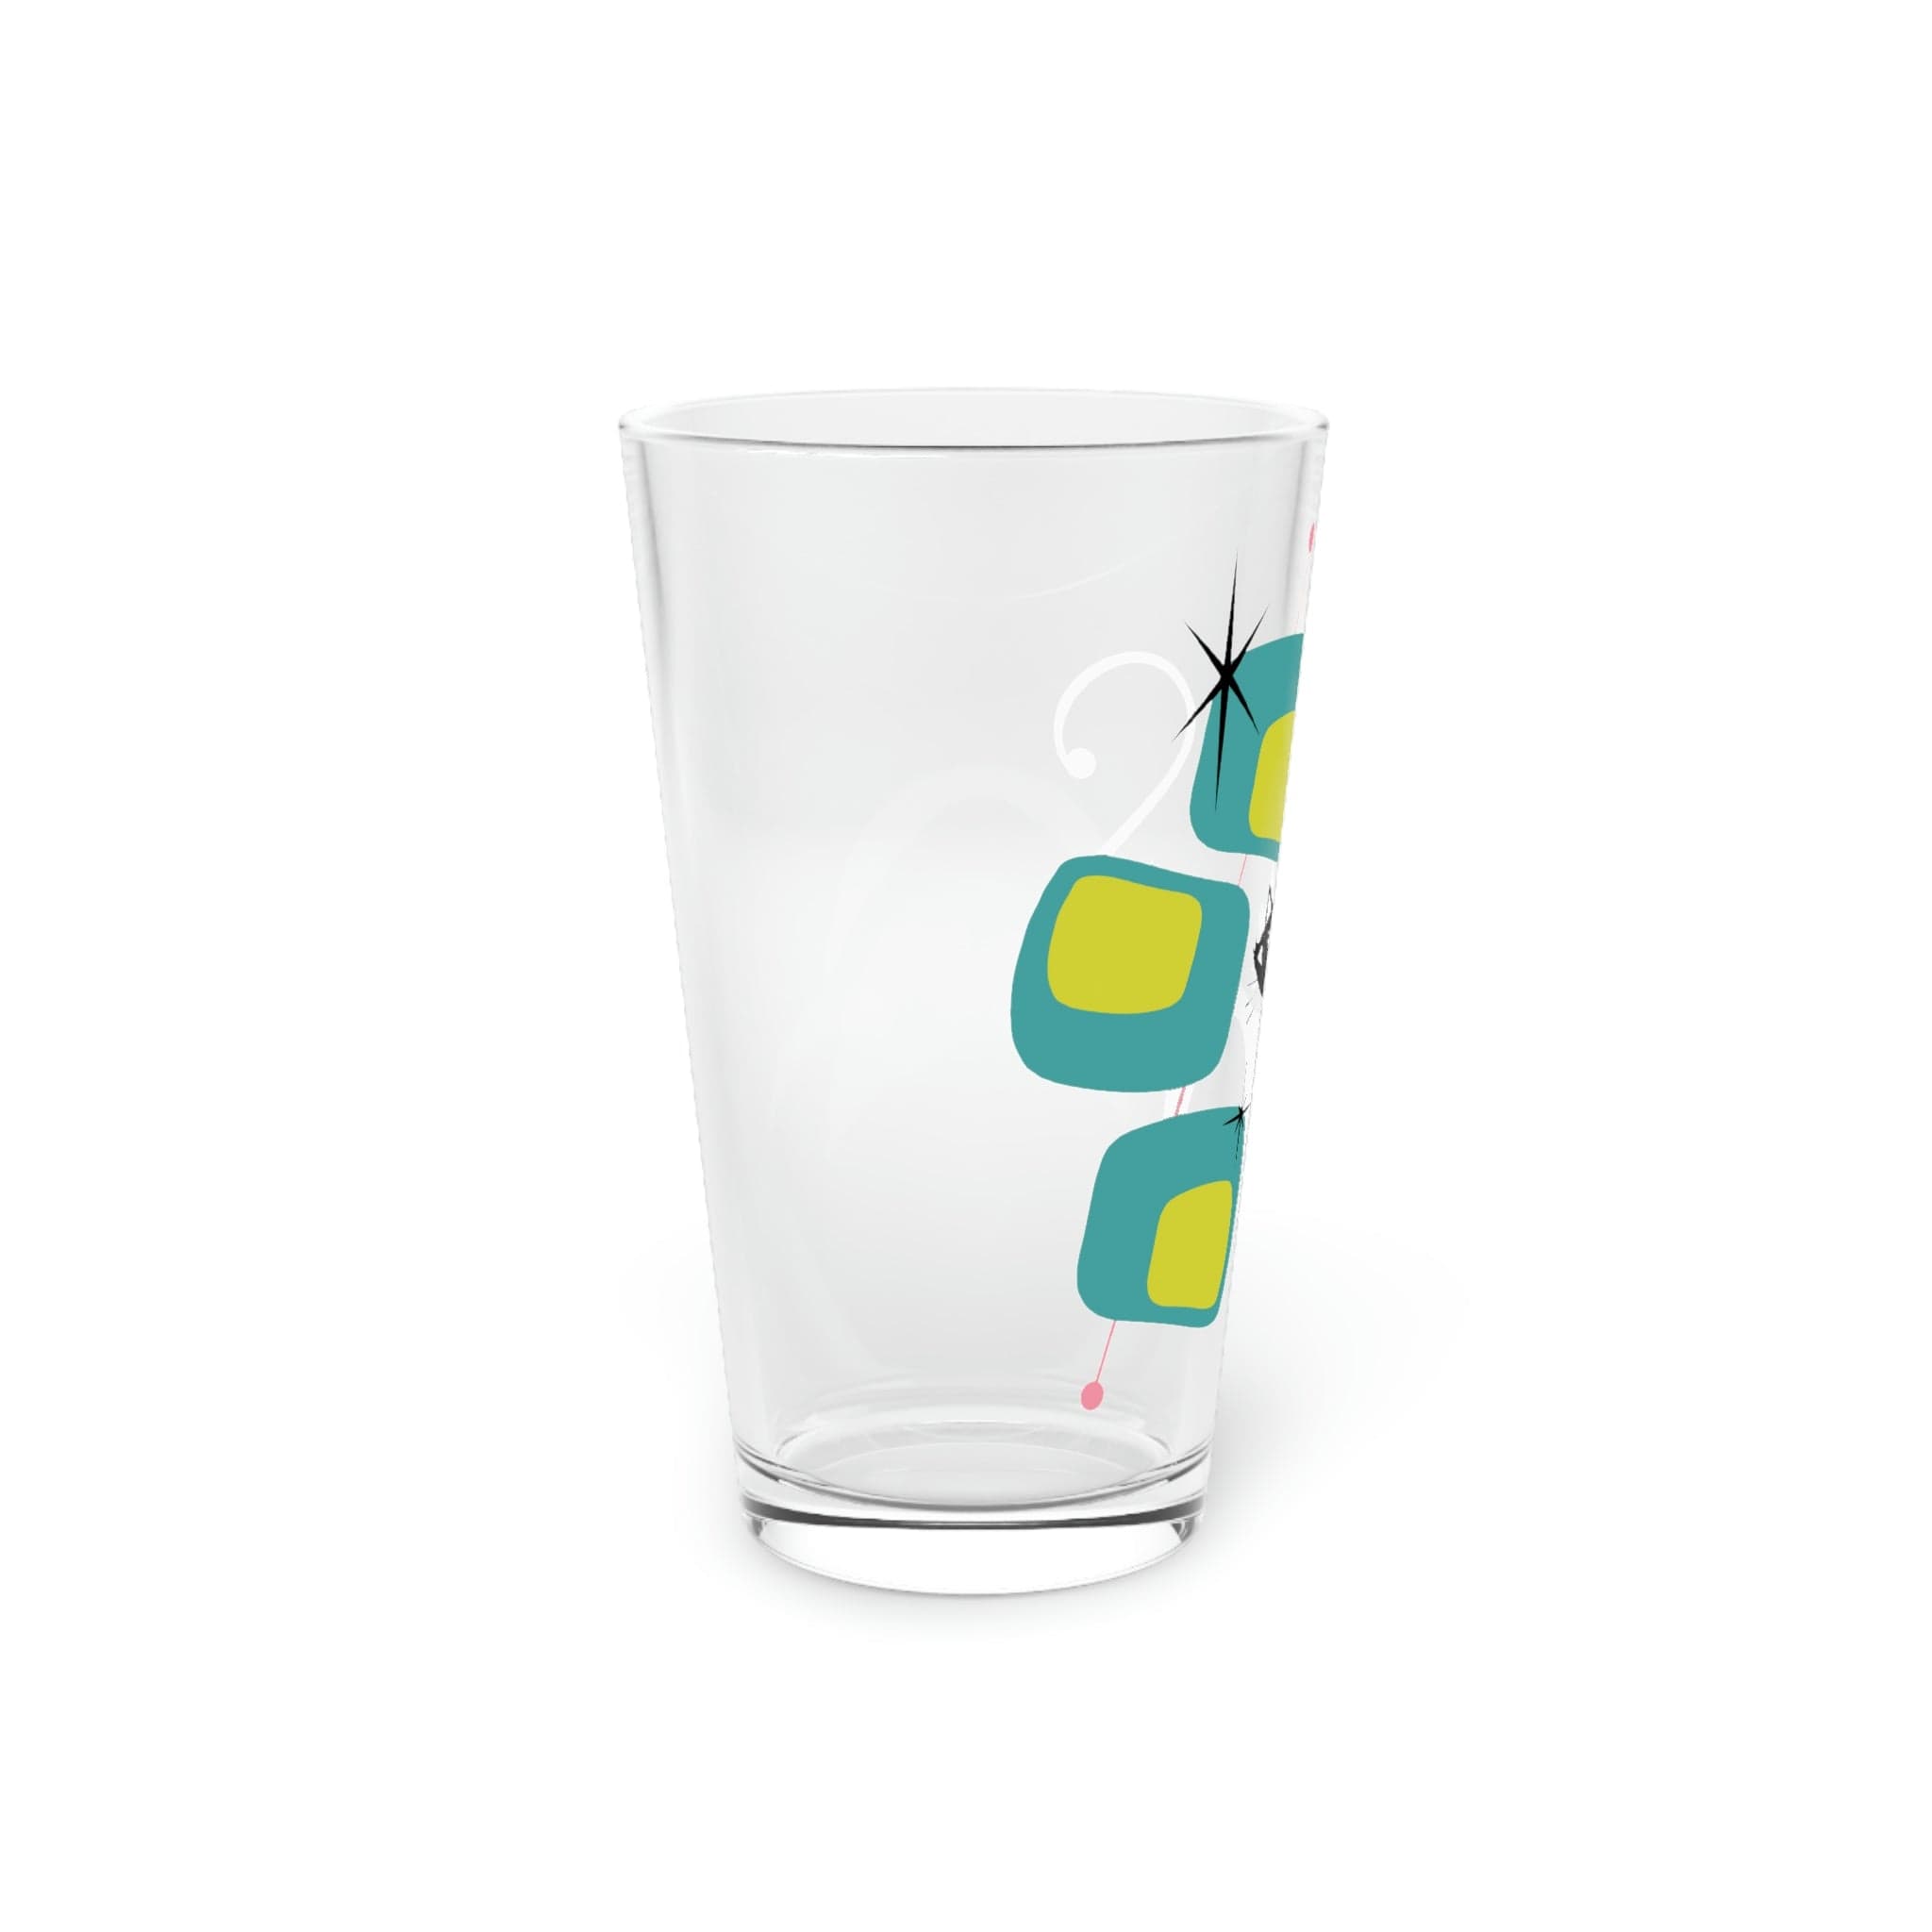 Kate McEnroe New York Atomic Cat Retro Kitsch Pint Glass, 16oz Mid Century Modern Beer Glass, MCM Glass, Beer Glassware Gifts, Party Drinkware, Cocktail GlassBeer Glasses21482491883001381578